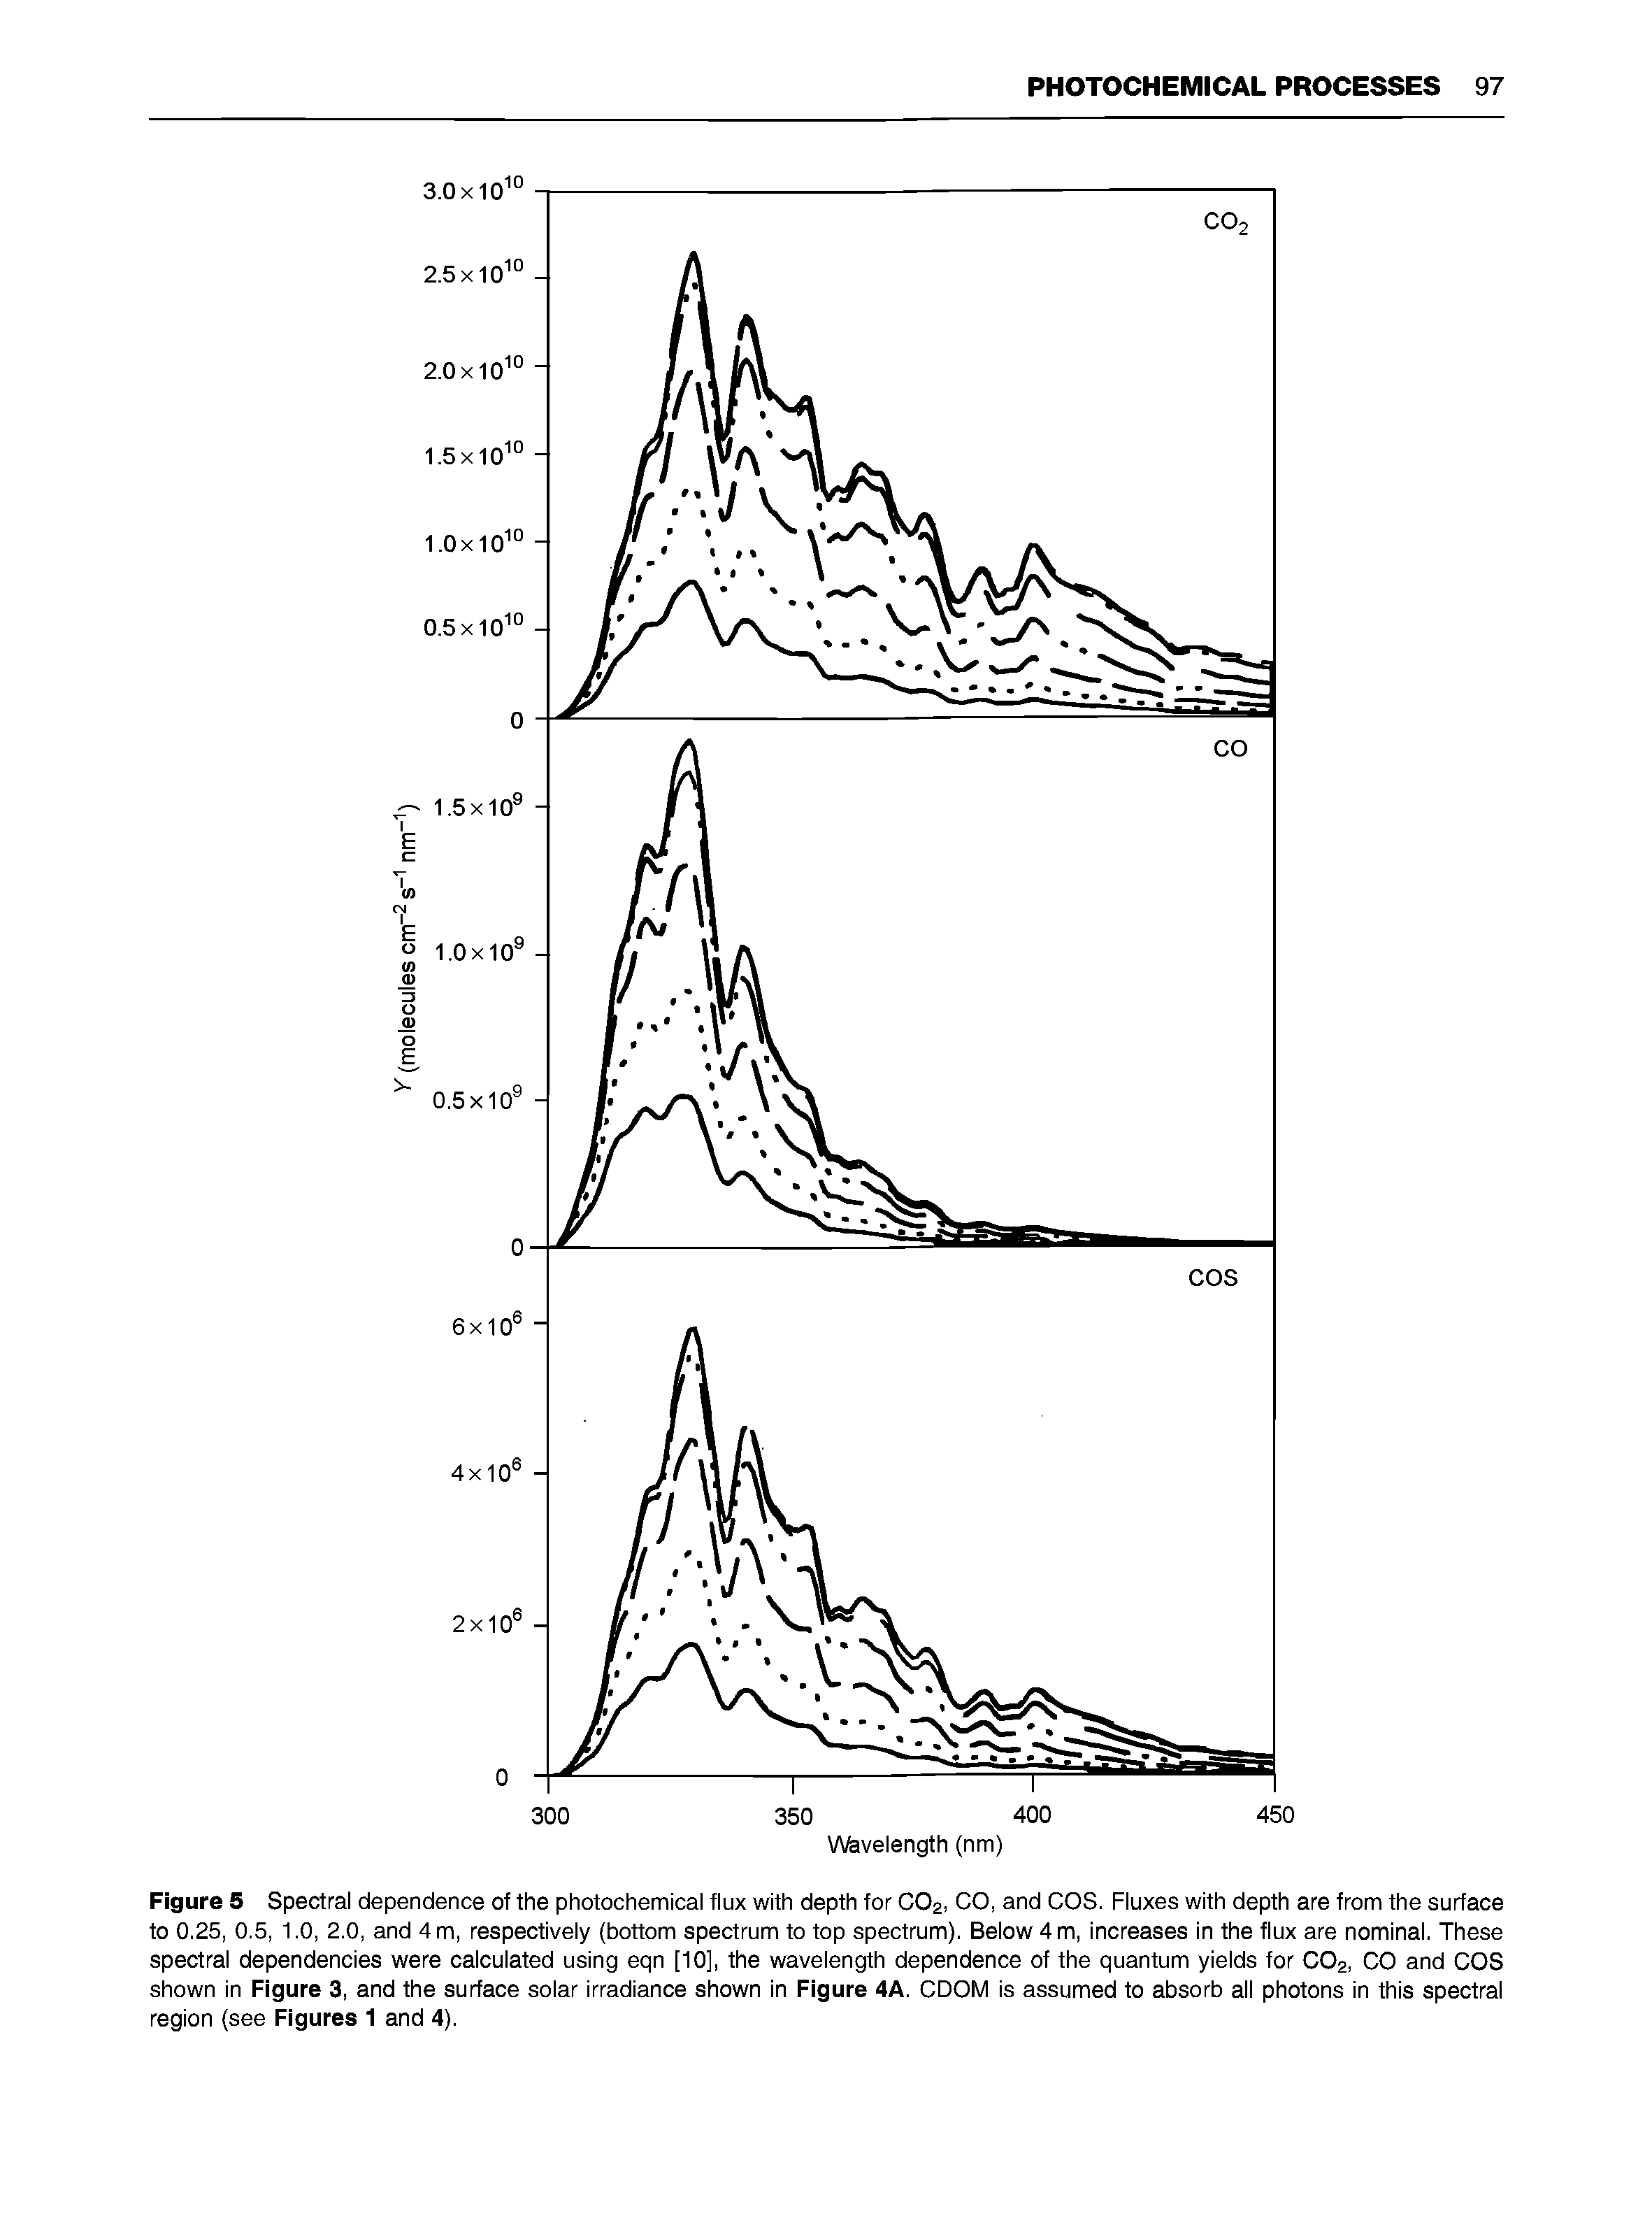 Figure 5 Spectral dependence of the photochemical flux with depth for CO2, CO, and COS. Fluxes with depth are from the surface to 0.25, 0.5, 1.0, 2.0, and 4 m, respectively (bottom spectrum to top spectrum). Below 4 m, increases in the flux are nominal. These spectral dependencies were calculated using eqn [10], the wavelength dependence of the quantum yields for CO2, CO and COS shown in Figure 3, and the surface solar irradiance shown in Figure 4A. CDOM is assumed to absorb all photons in this spectral region (see Figures 1 and 4).